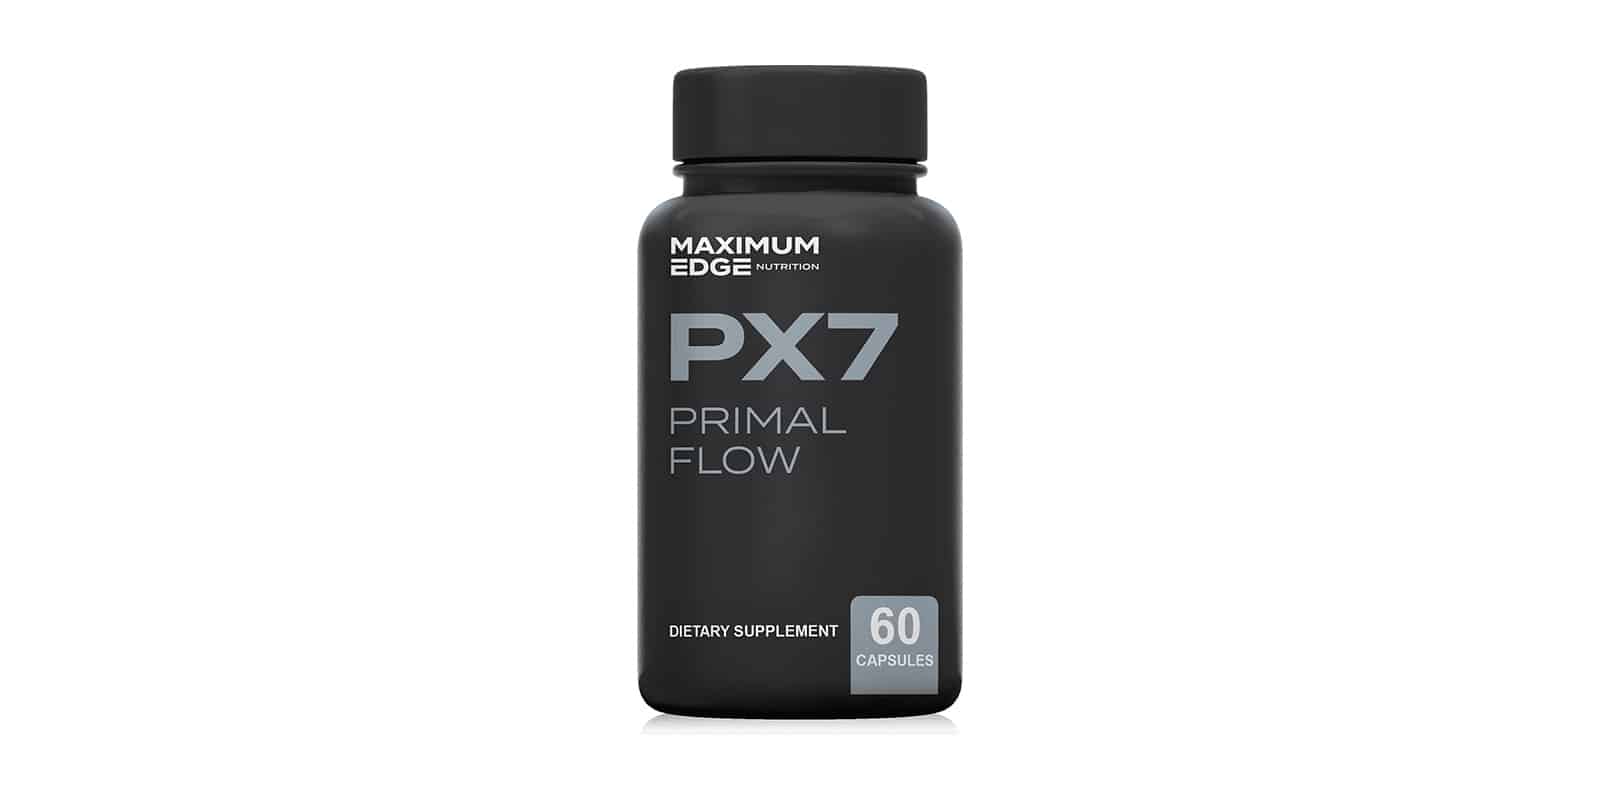 PX7 Primal Flow Reviews - Does this Primal Flow Pill Cure Prostate Issues?